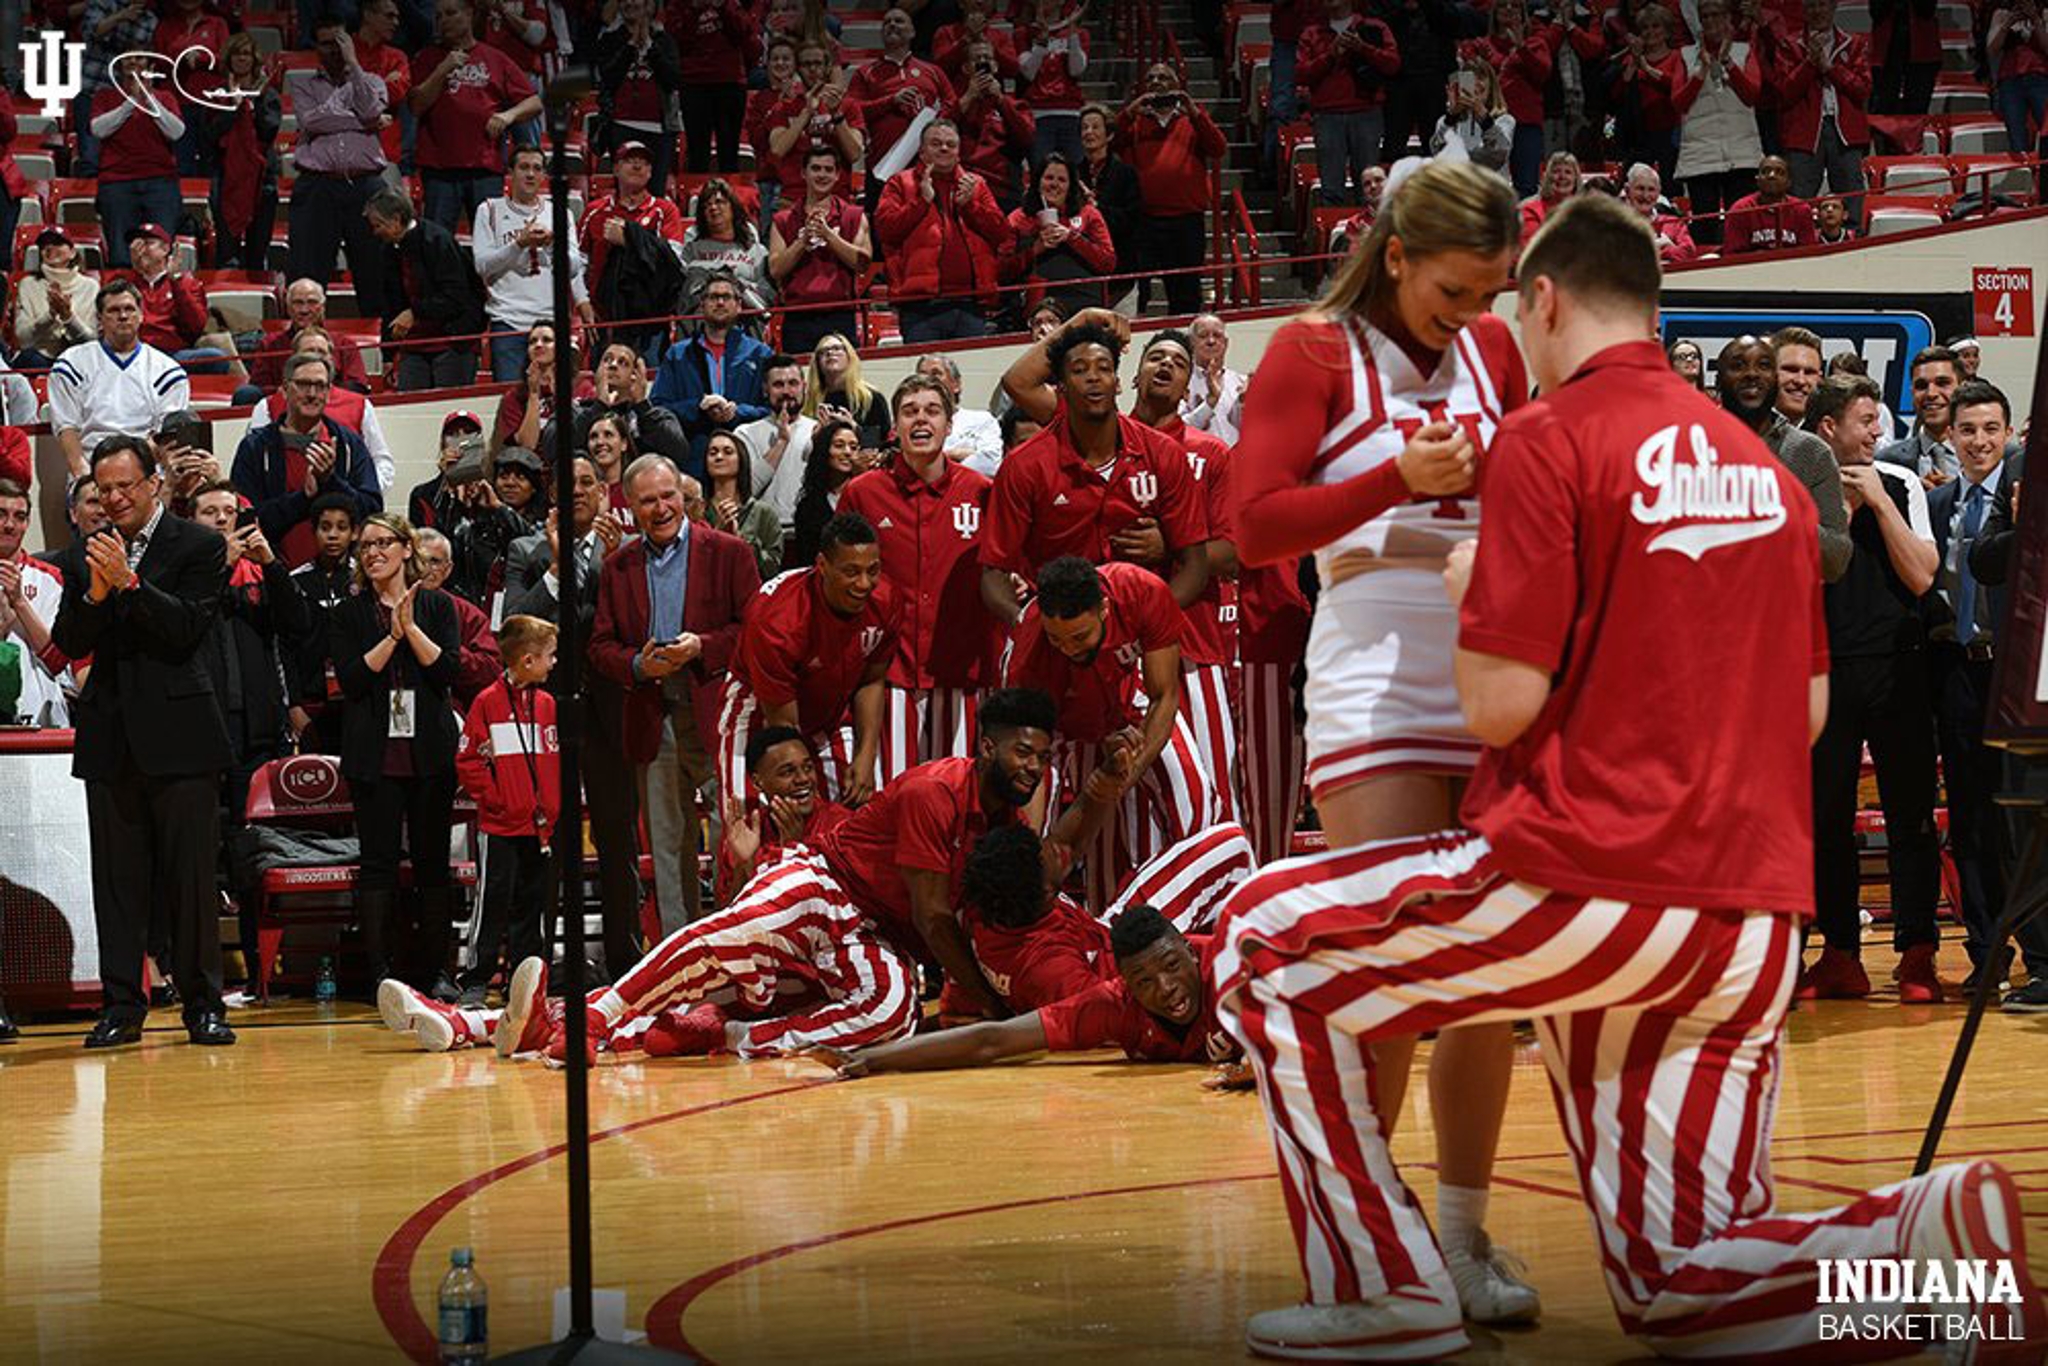 Just some of the players. I'd love to meet them all!!  Iu hoosiers, Indiana  hoosiers basketball, Hoosiers basketball